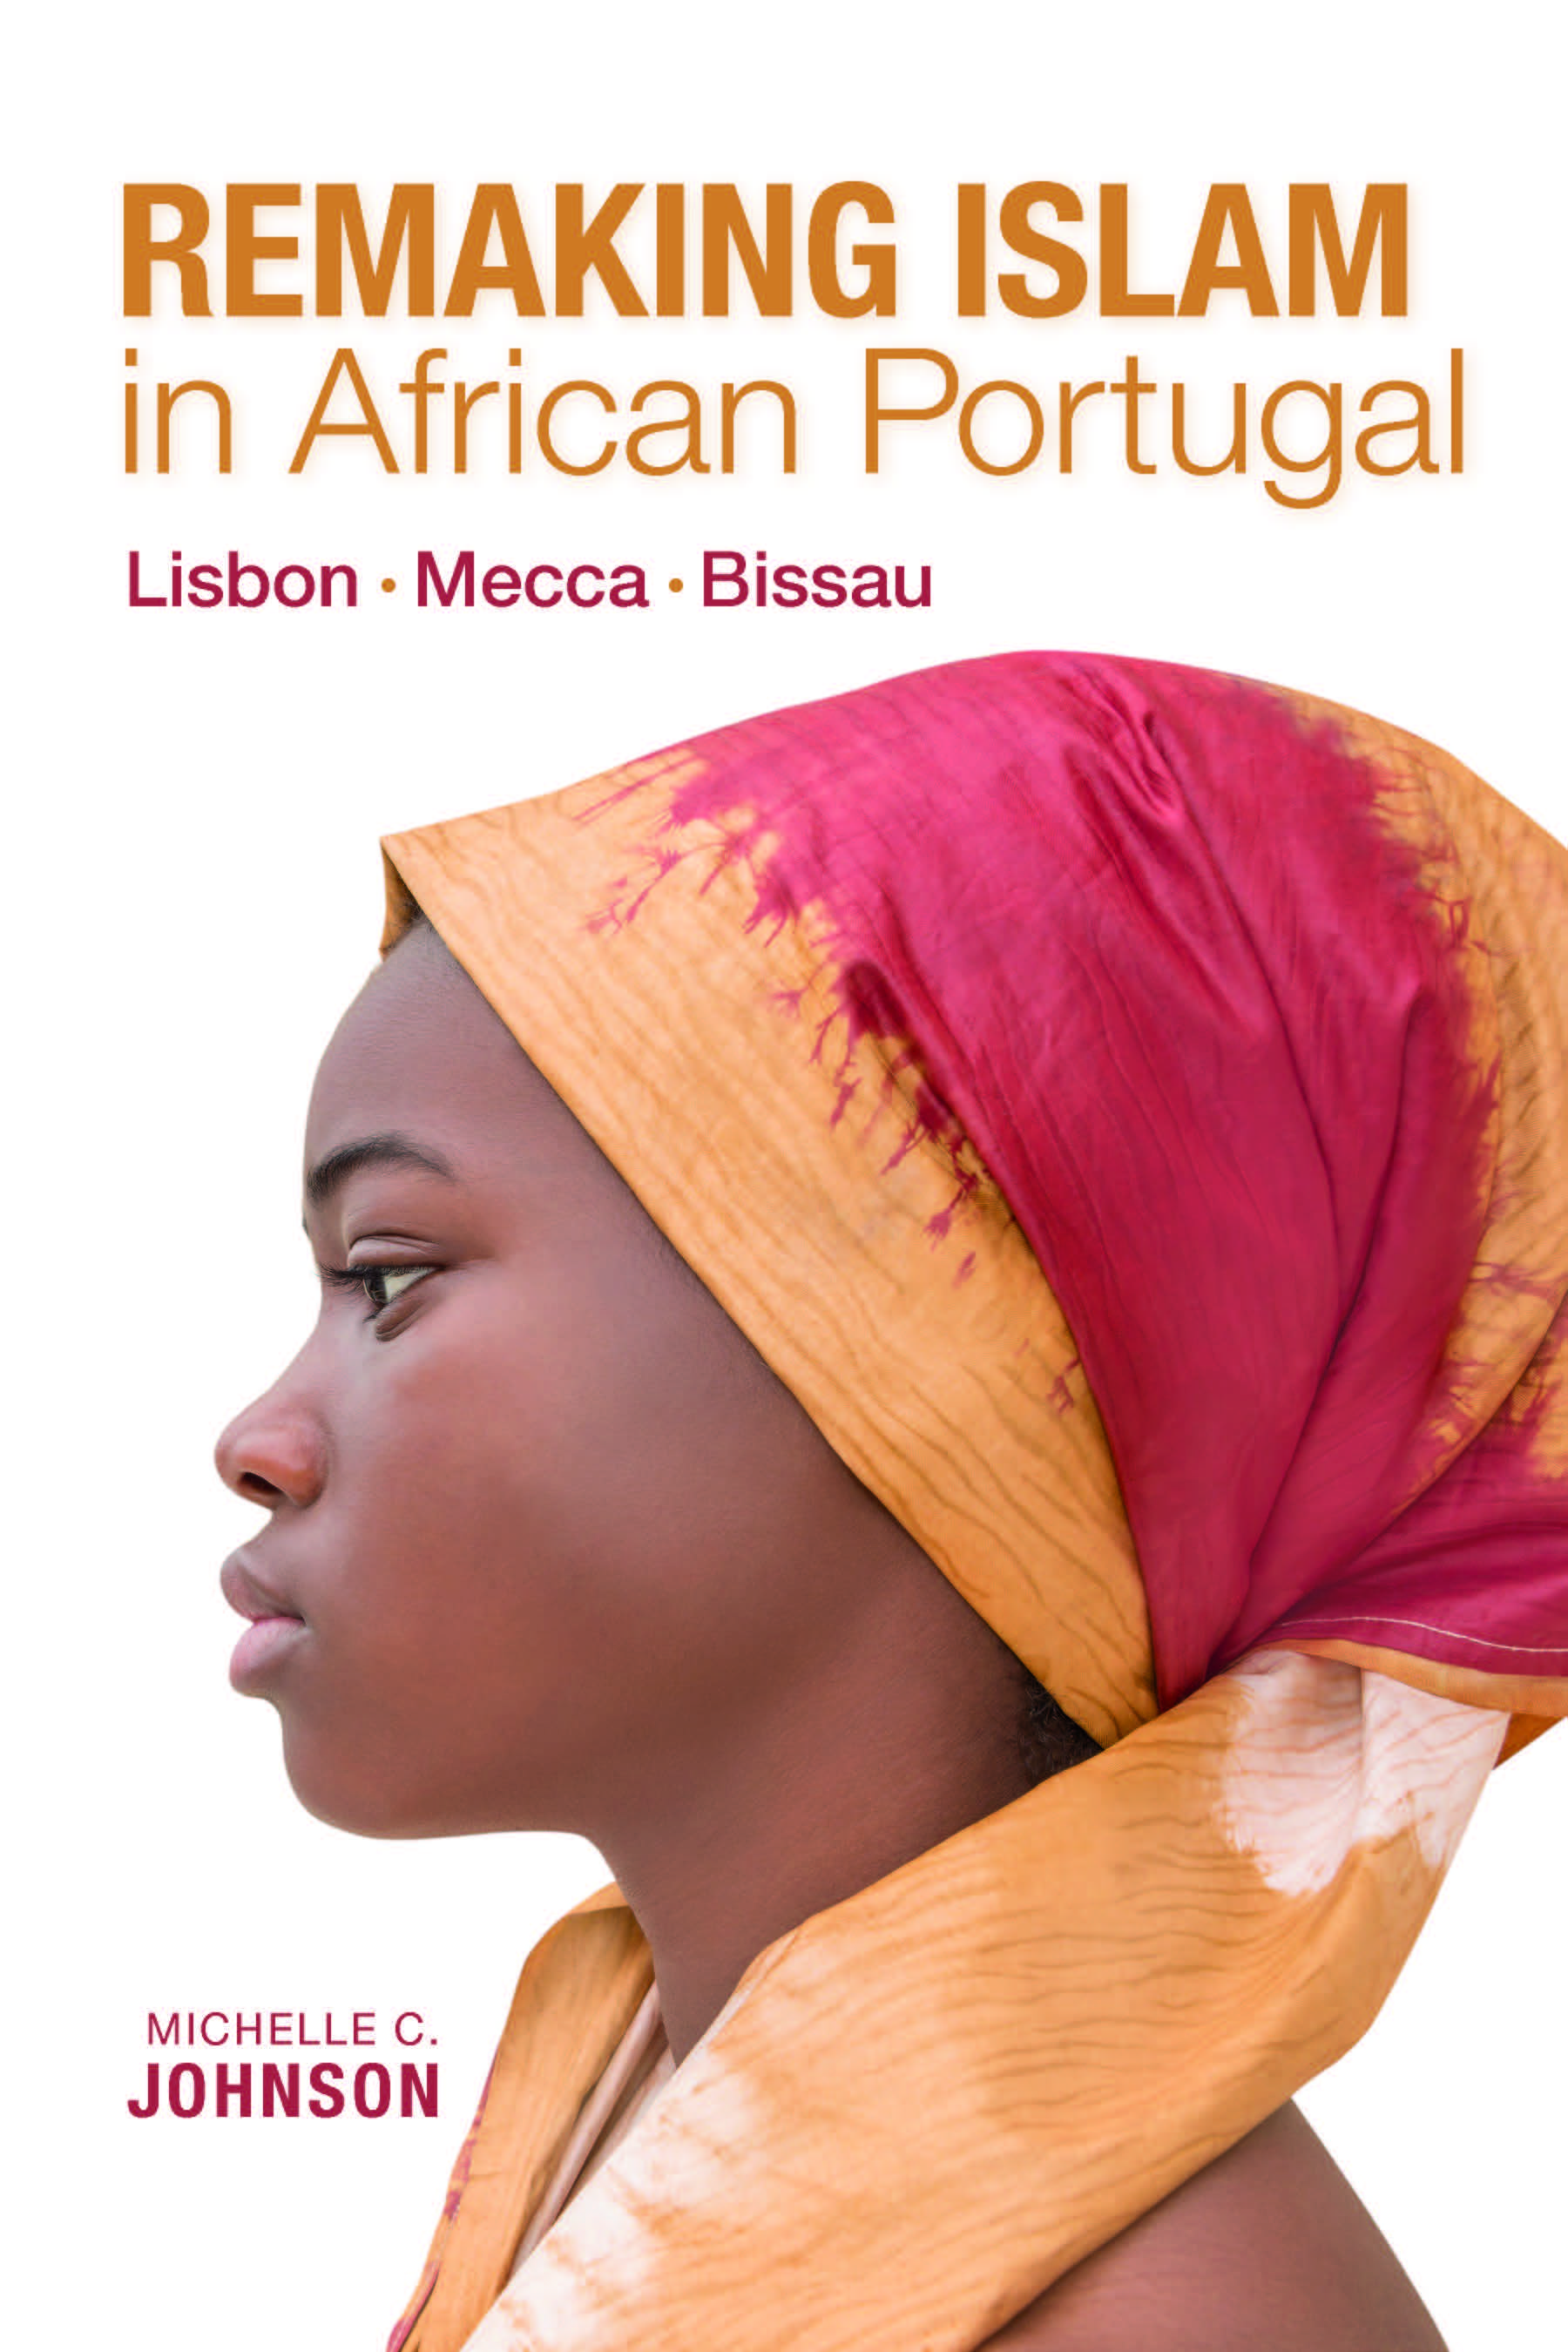 Remaking Islam in African Portugal book cover.